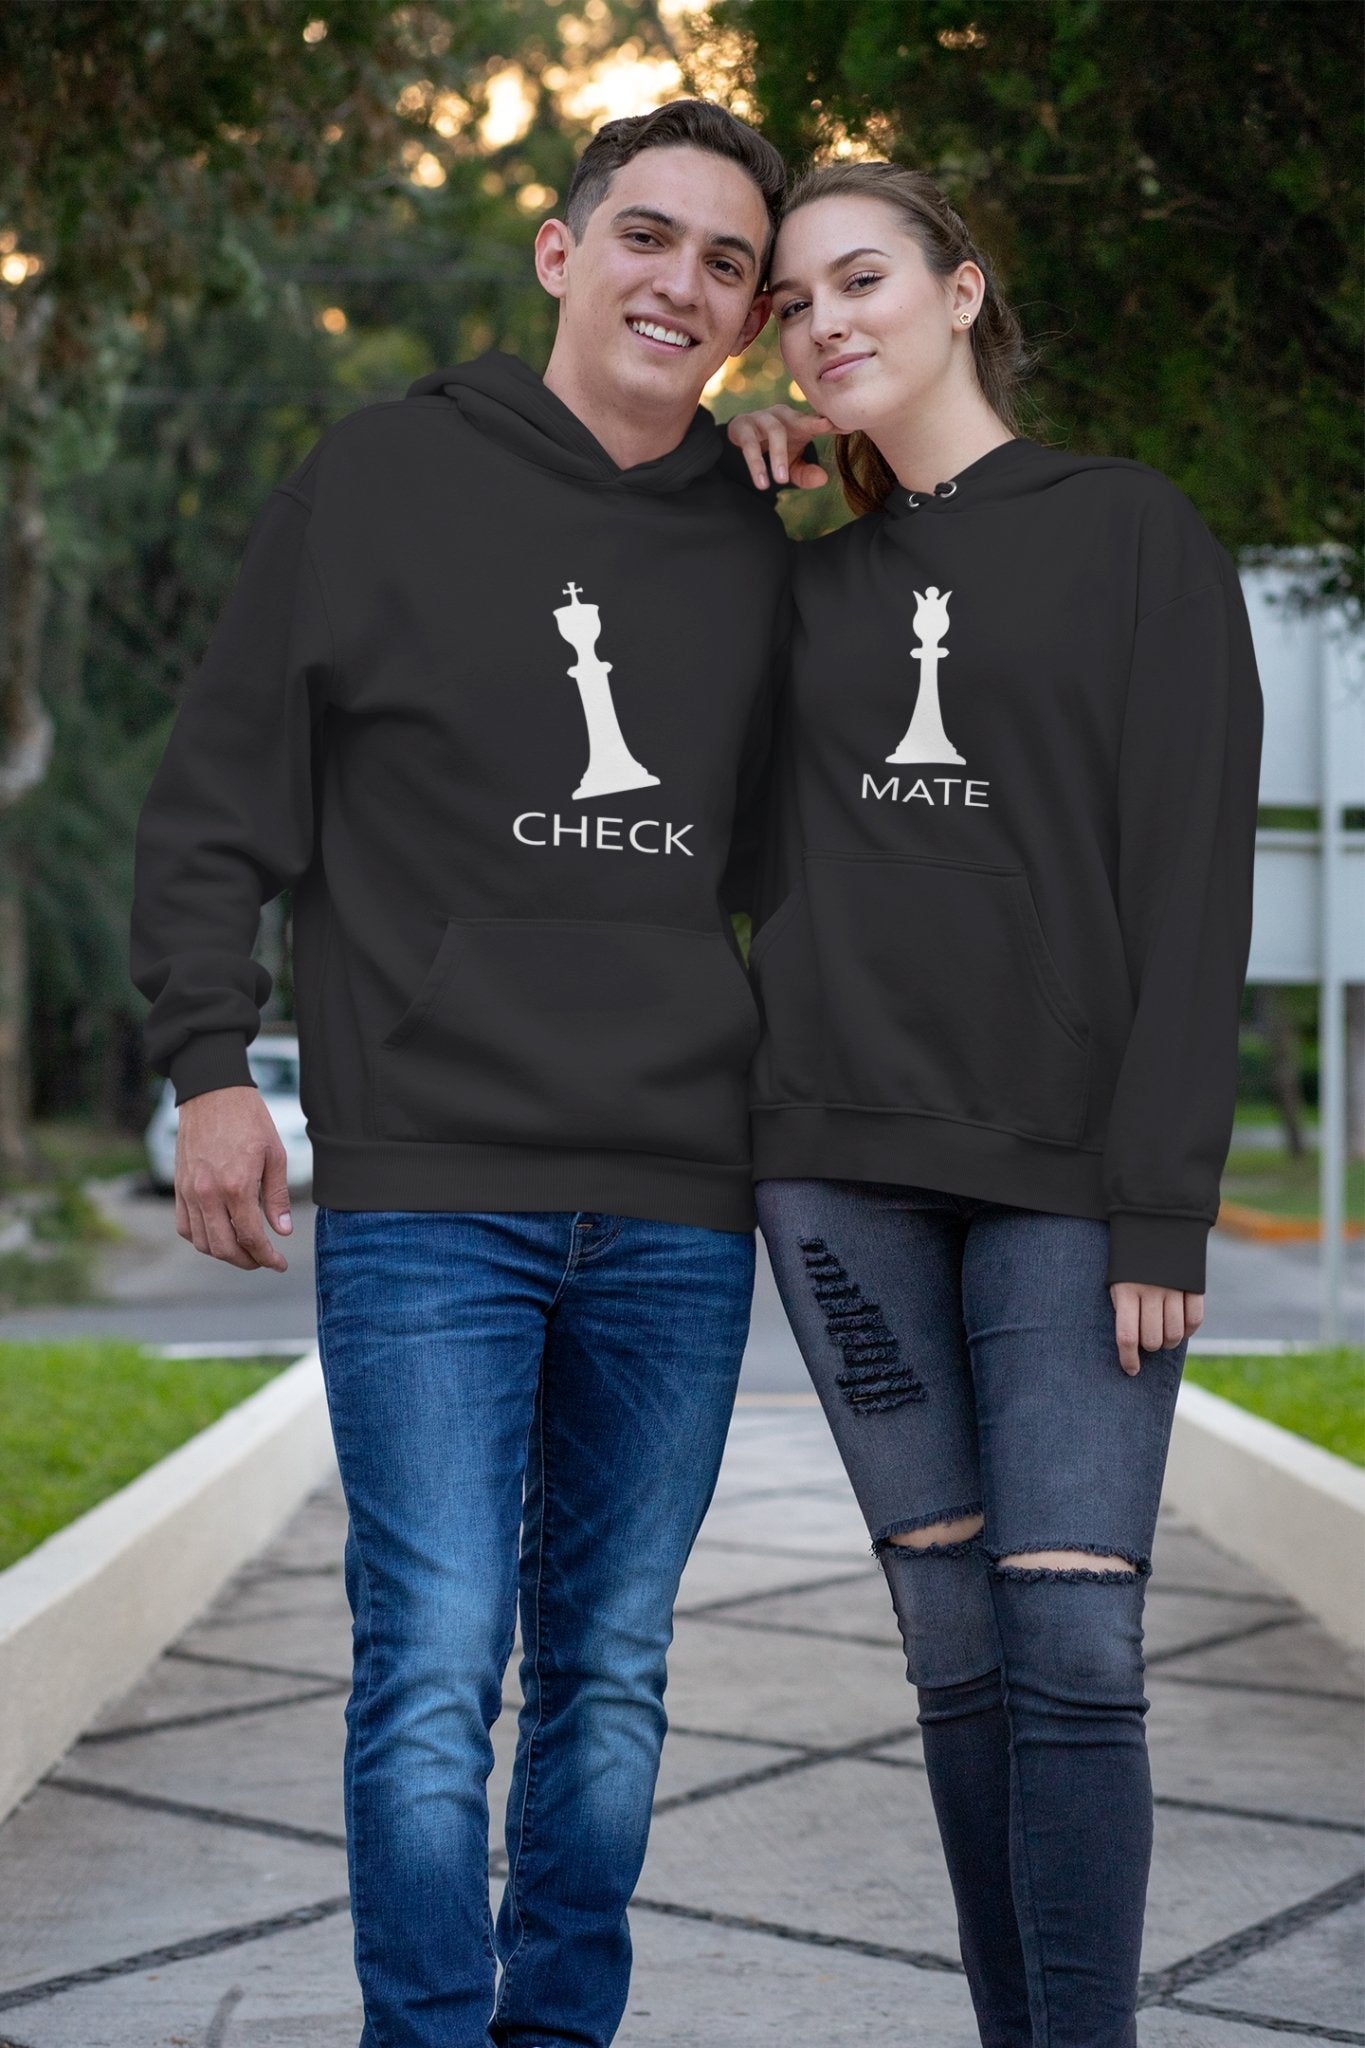 Check Mate Couple Hoodie-FunkyTradition - FunkyTradition